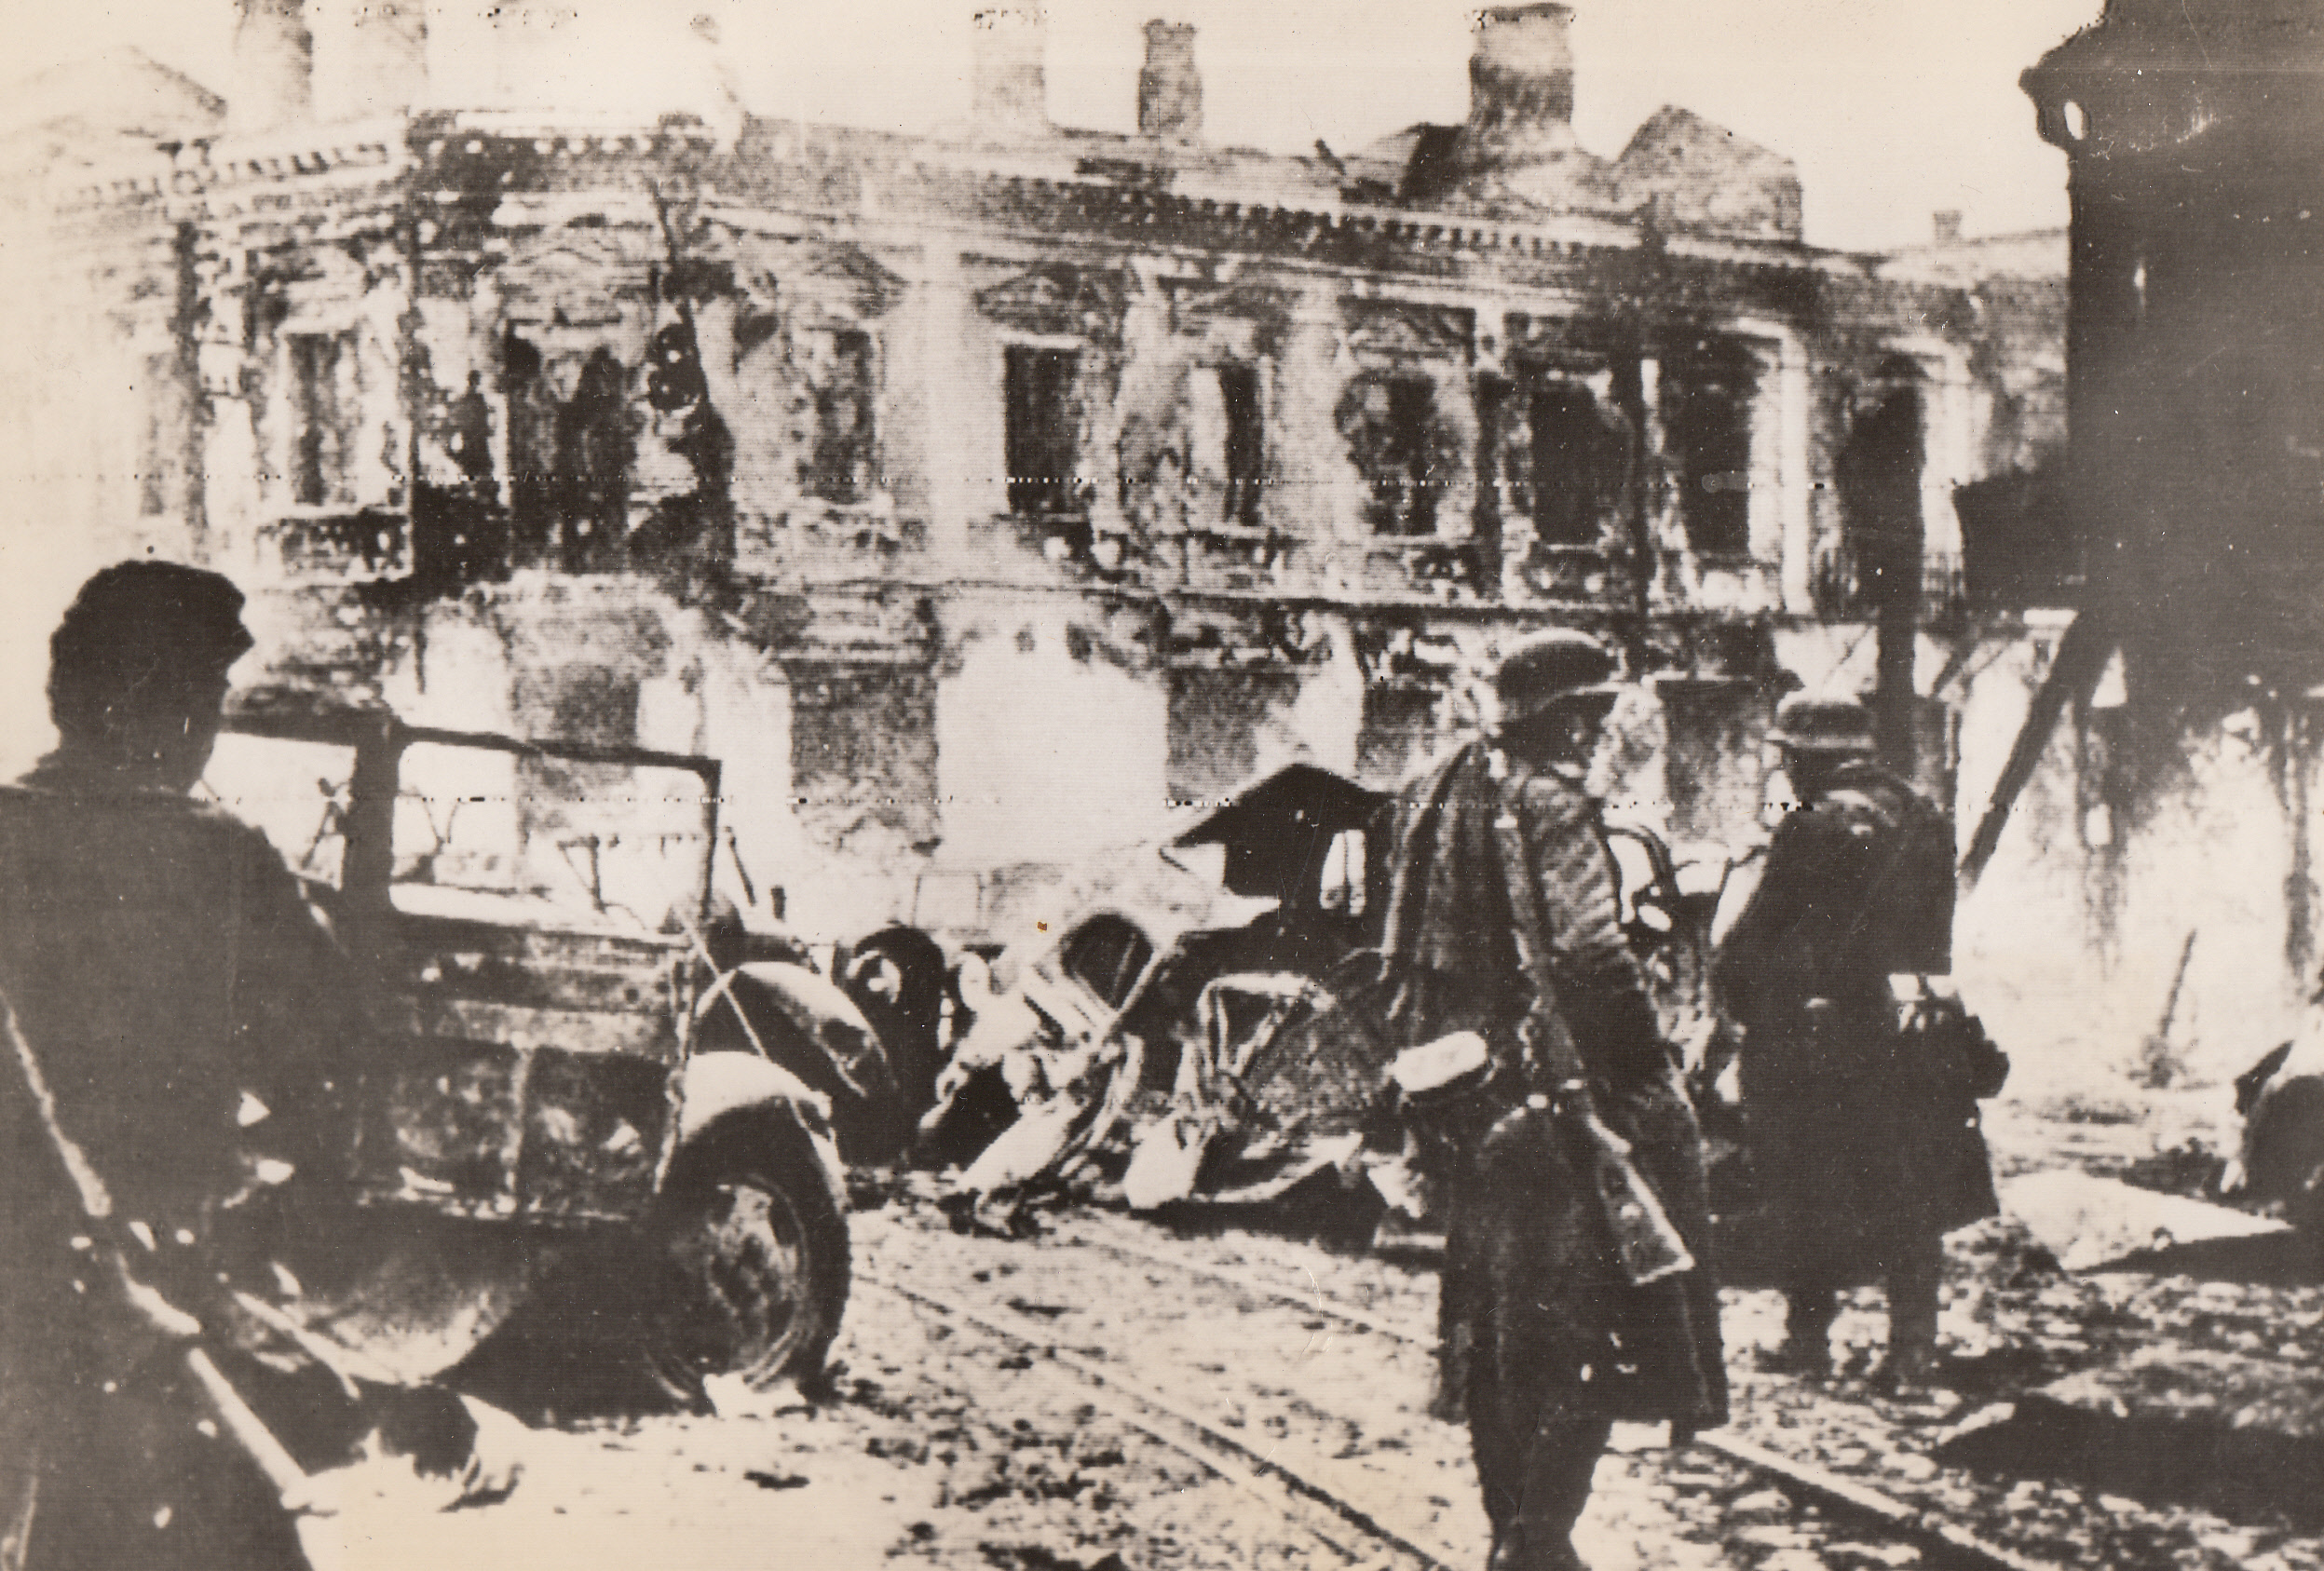 Brief Visit, 1/7/1944. Zhitower, U.S.S.R.—Launching their counter-offensive against the Kiev salient, the Germans tasted success briefly when they re-occupied battered Zhitomer. In this photo, received in London through a neutral source, Nazi infantrymen survey the city’s ruined streets.;